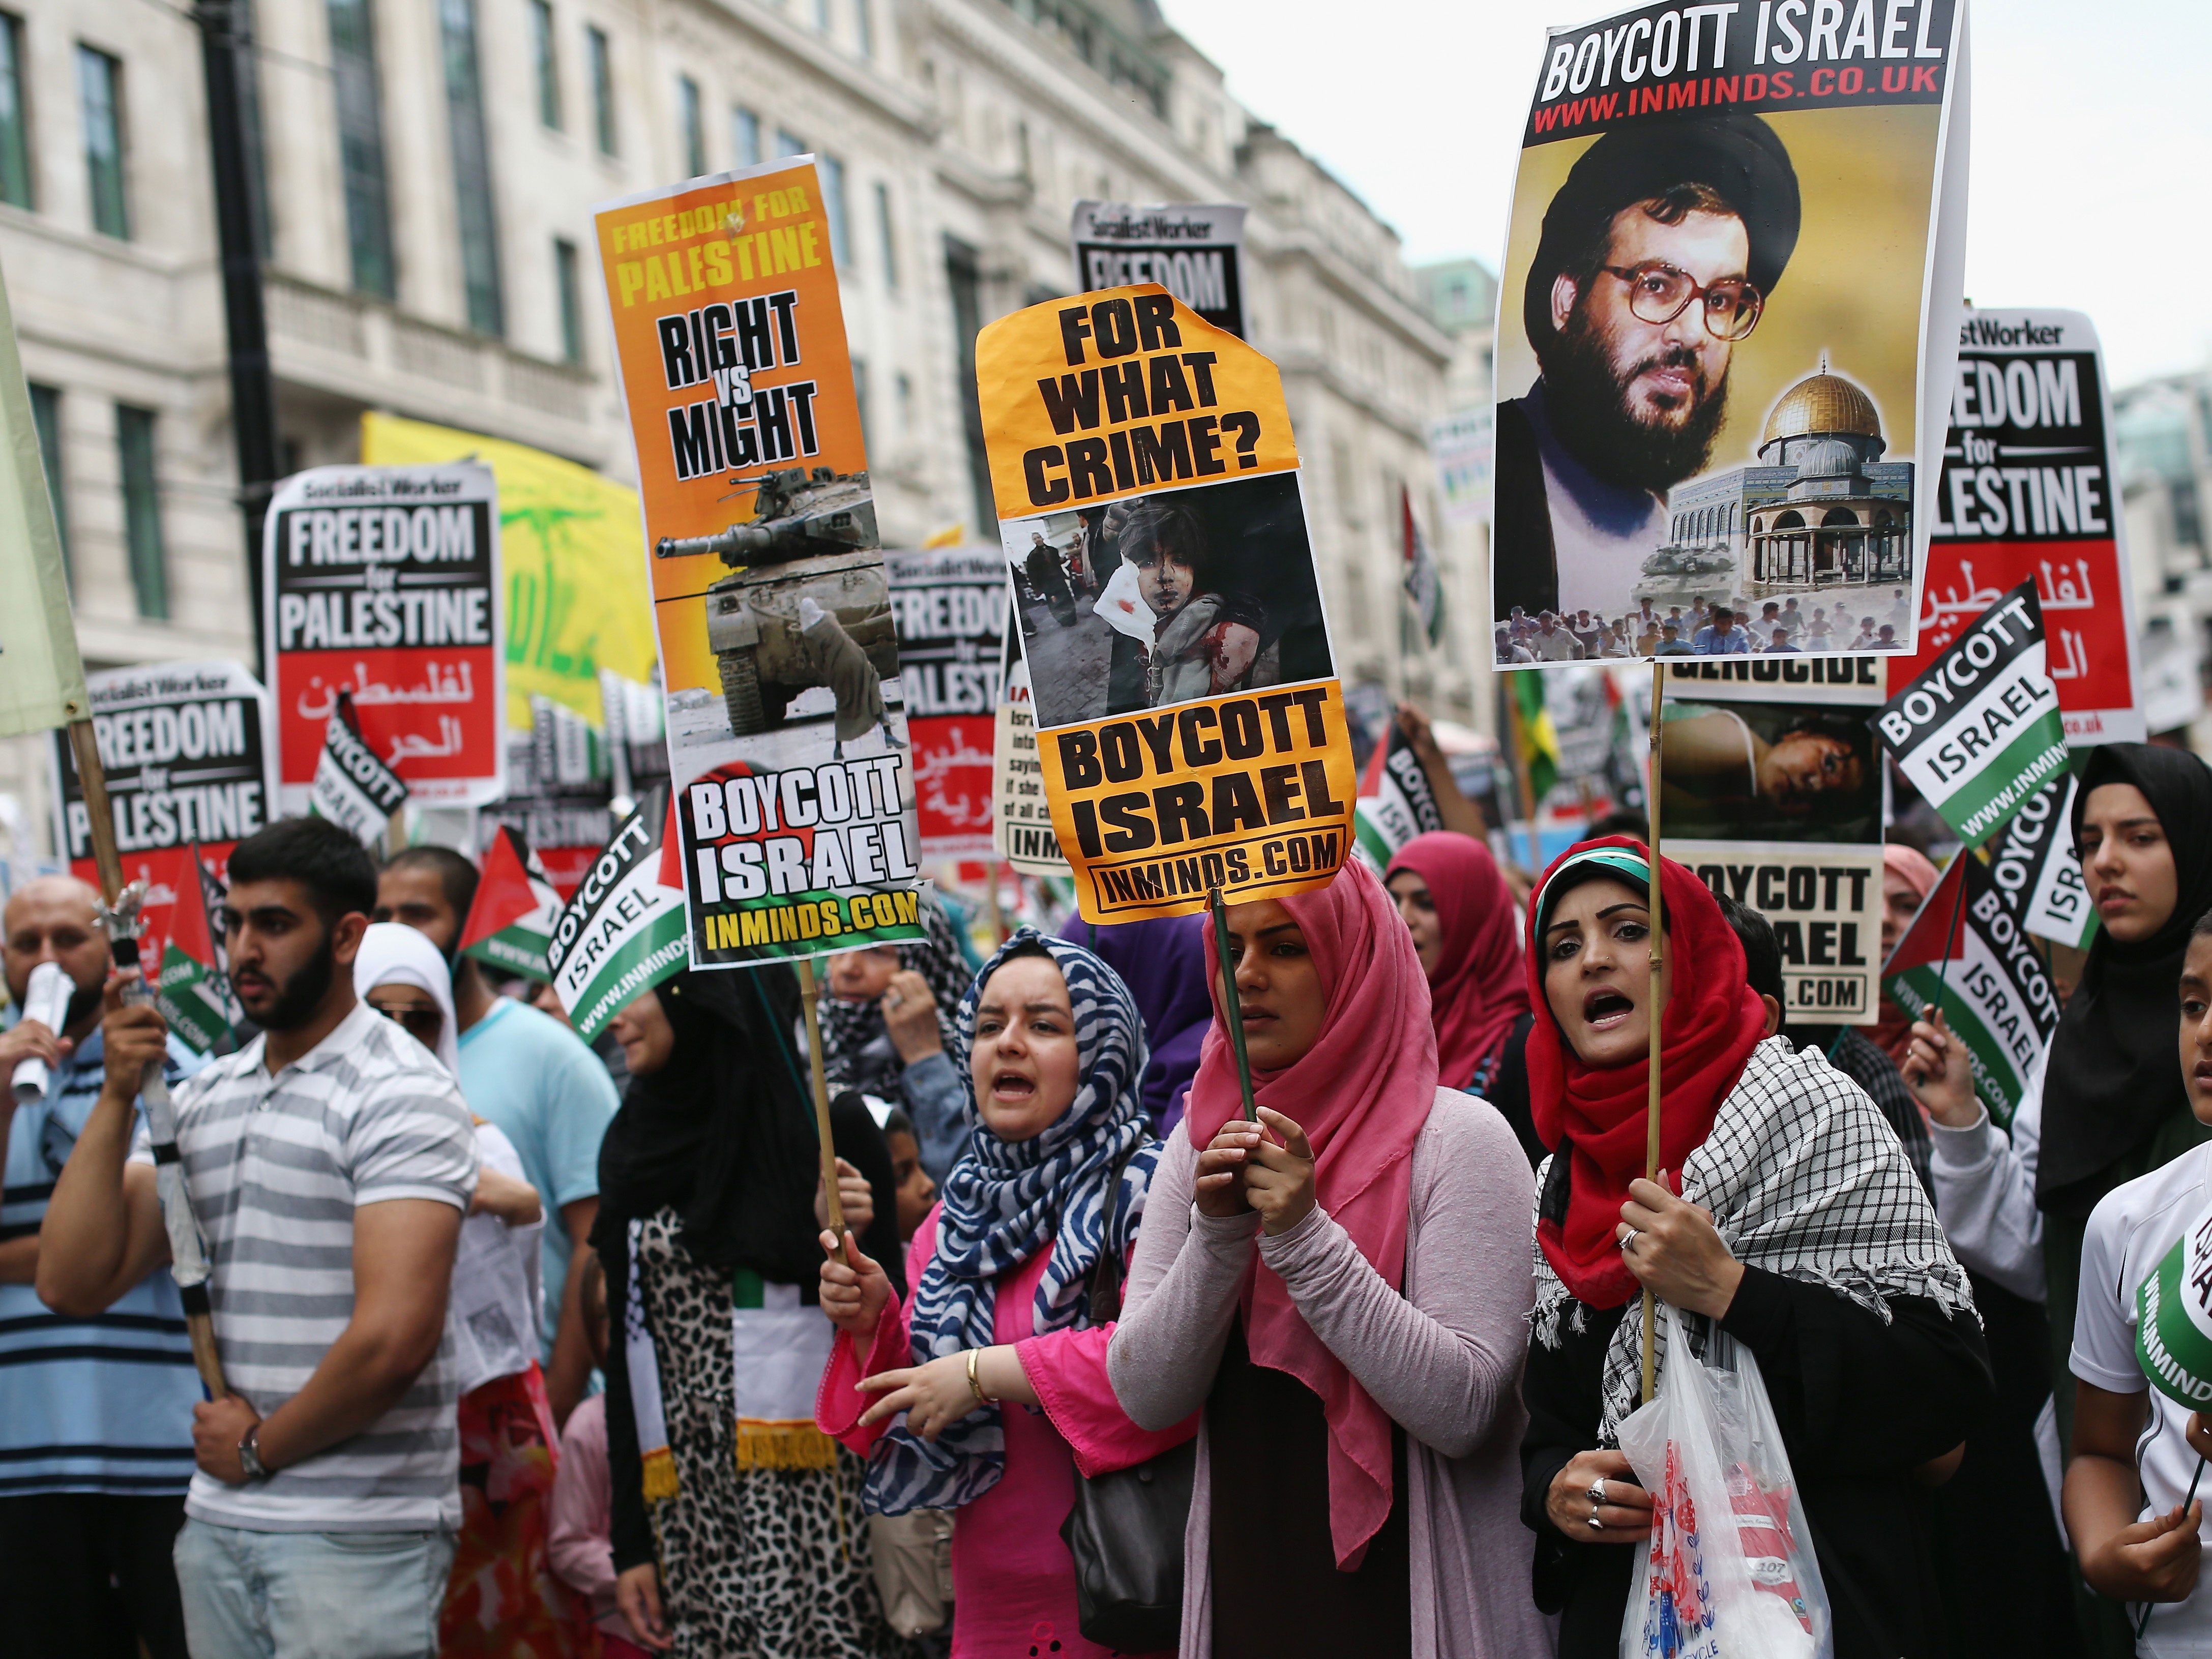 Al-Quds Day is marked with annual protests in London and around the world to oppose Israel's borders and express solidarity with the Occupied Palestinian Territories